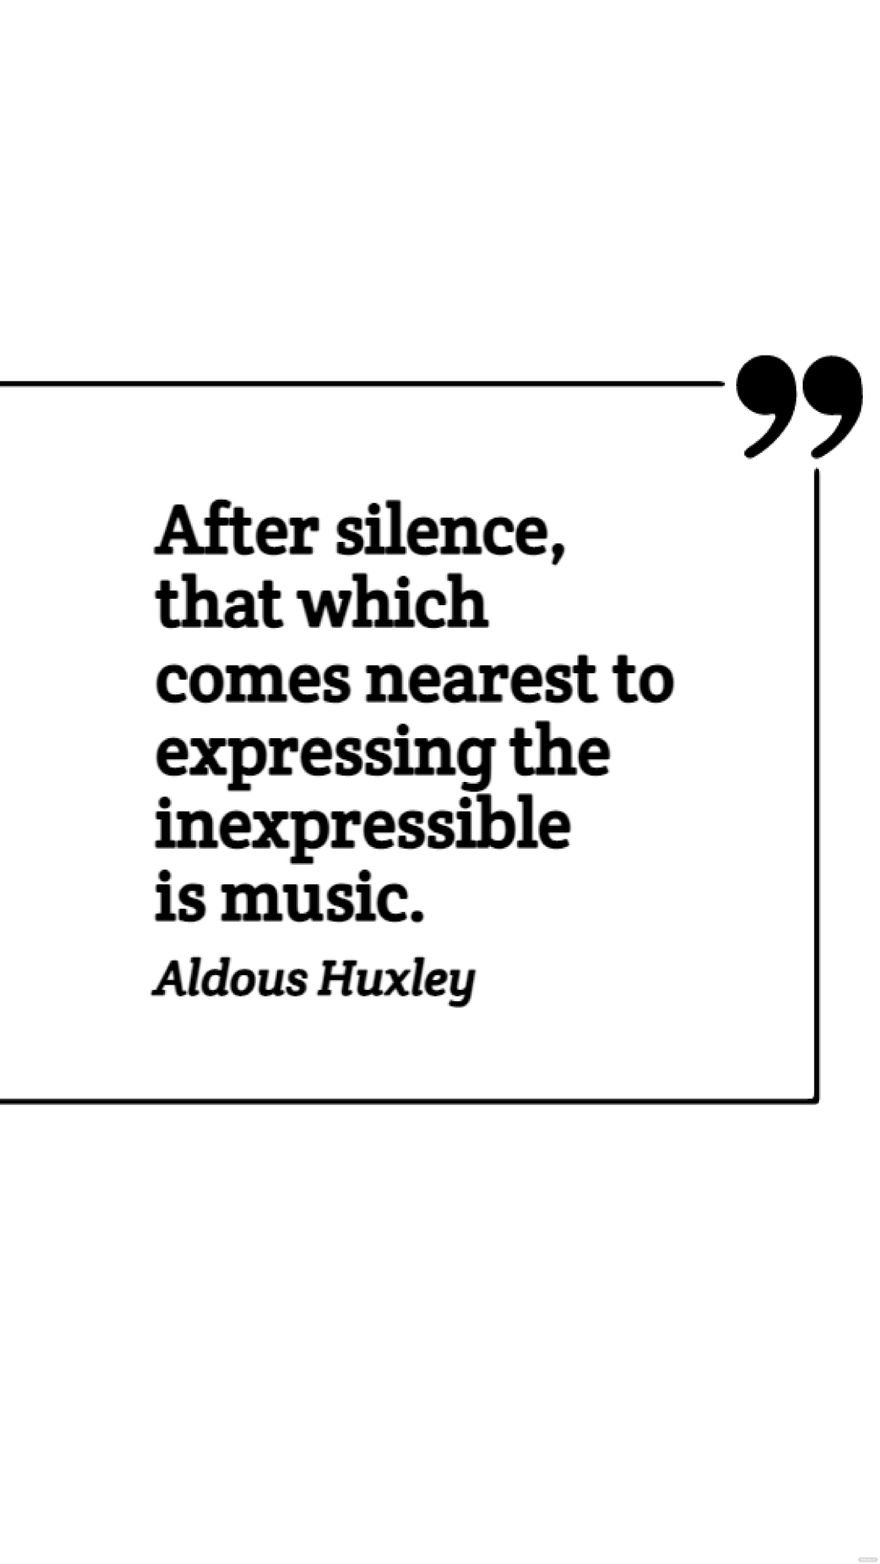 Aldous Huxley - After silence, that which comes nearest to expressing the inexpressible is music.